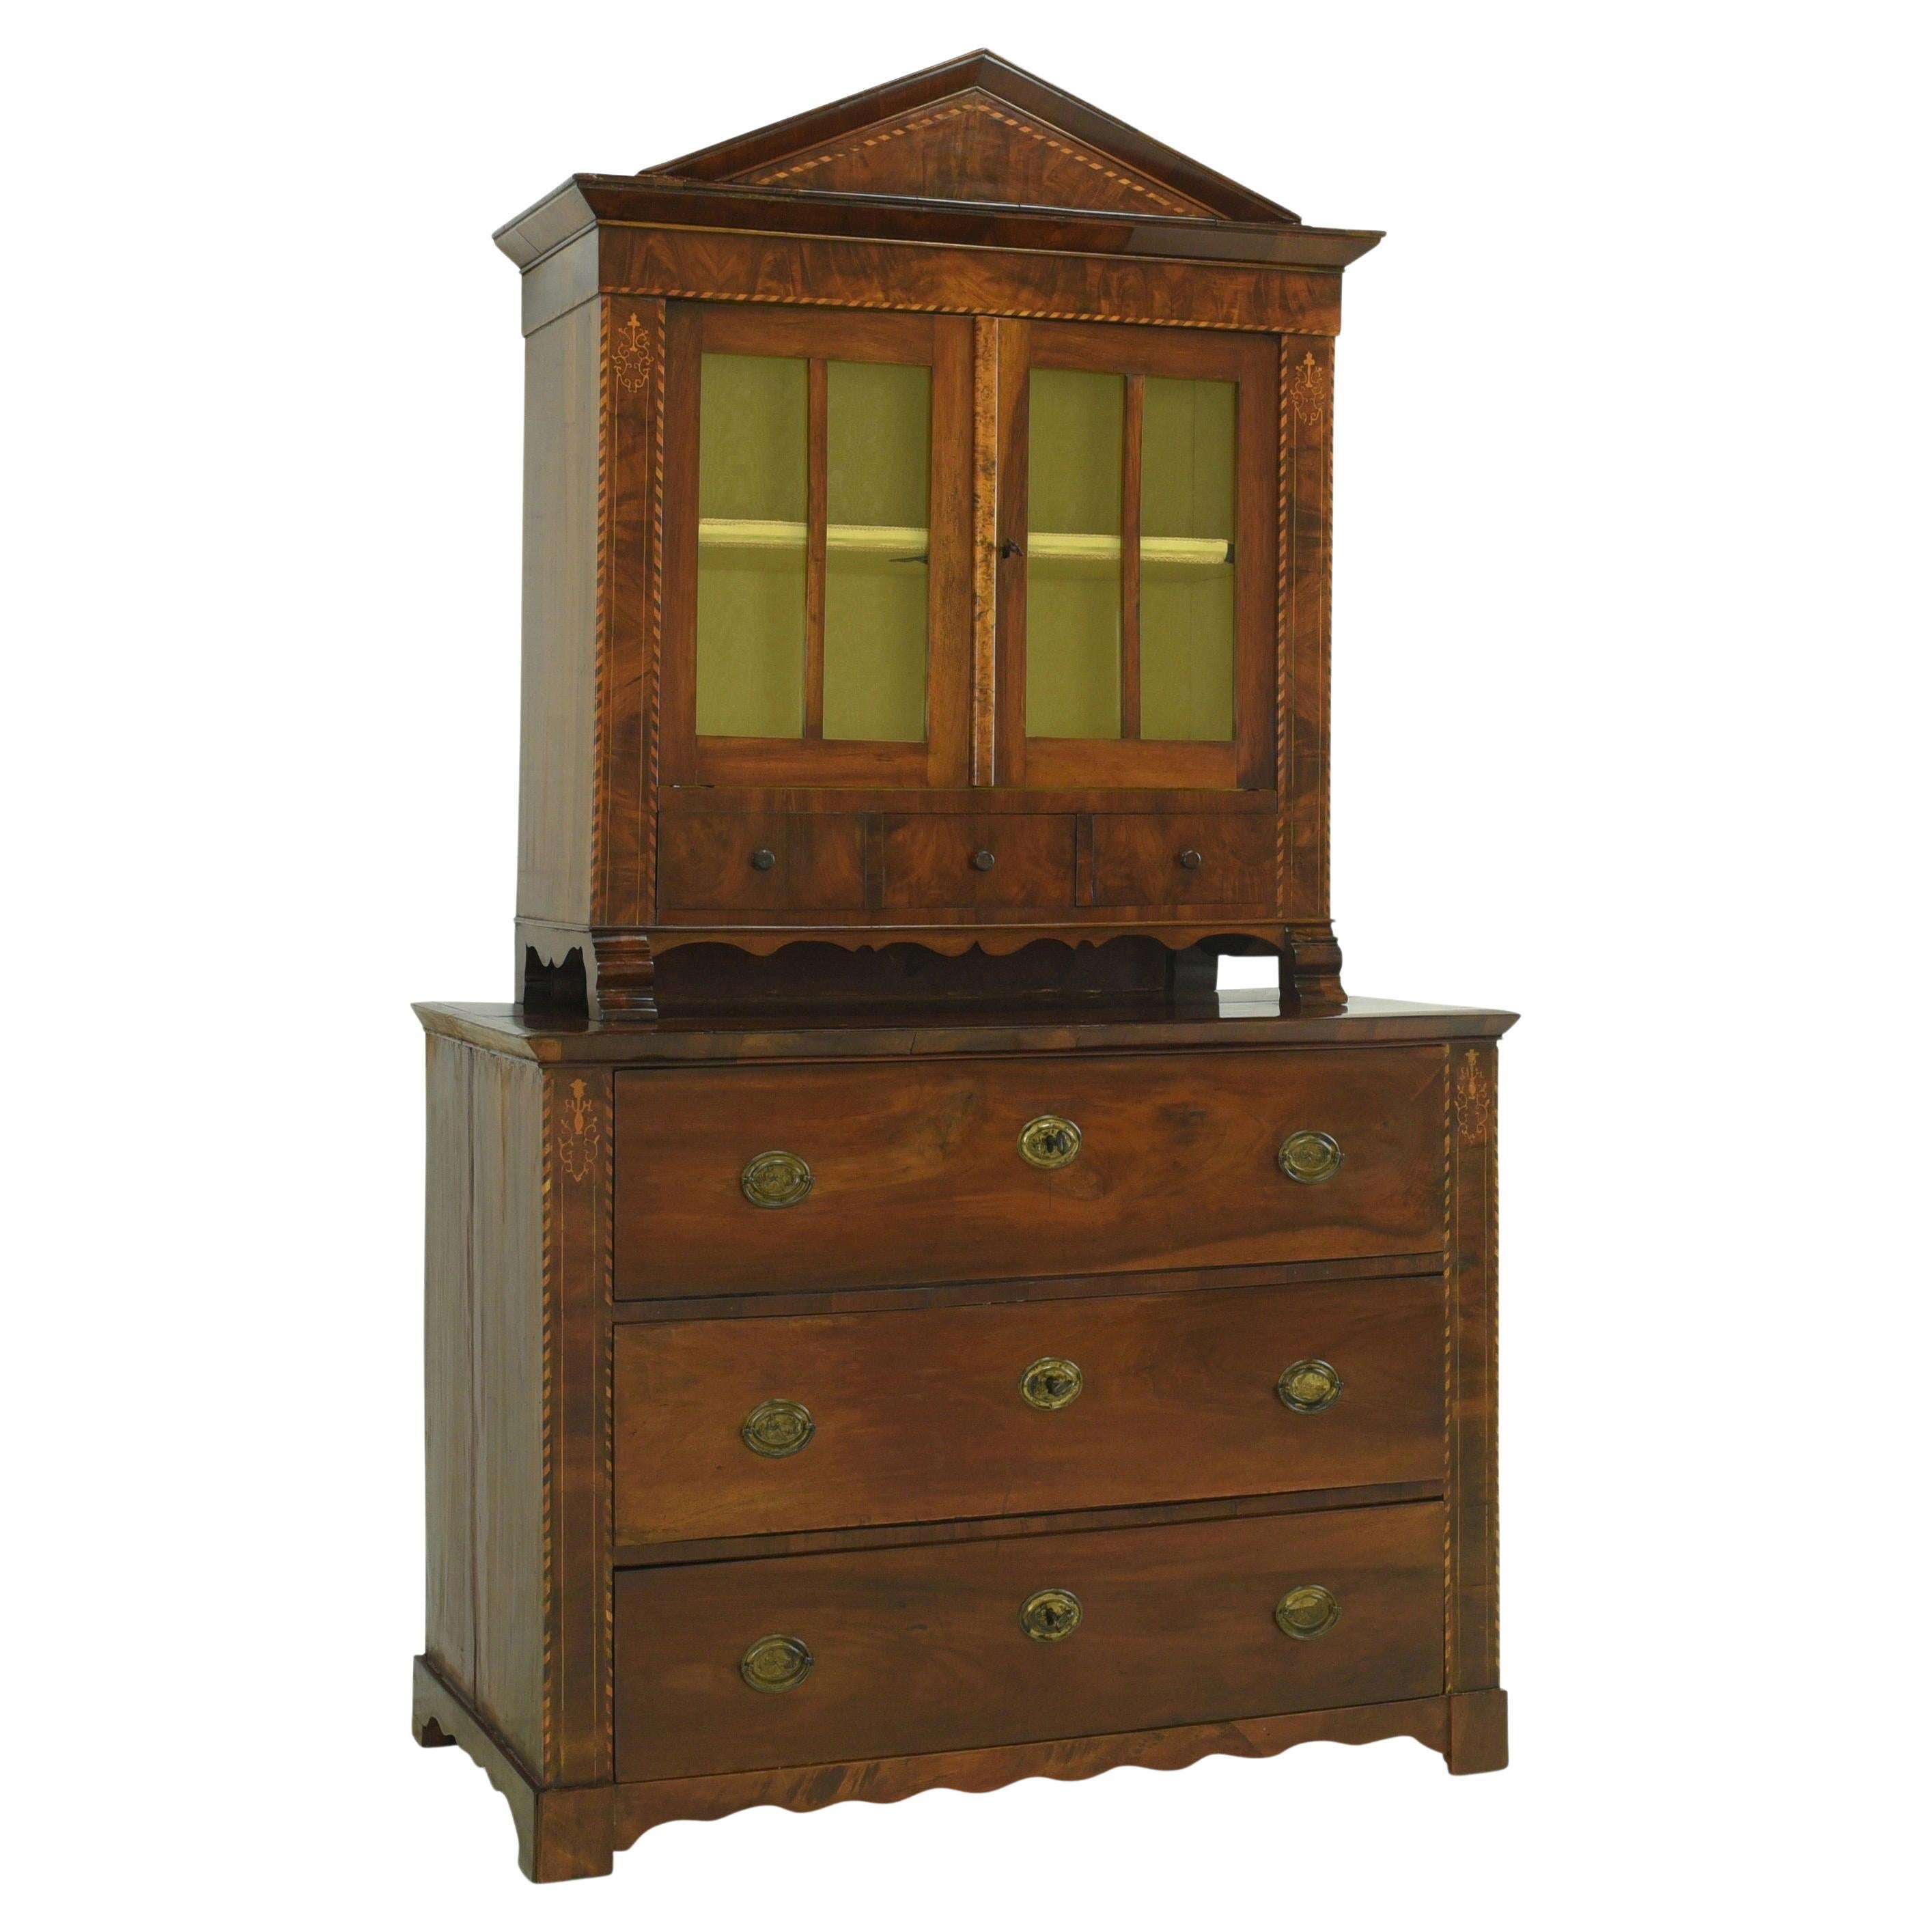 Biedermeier Anno Buffet Cabinet / Top Chest of Drawers in Walnut, 1808